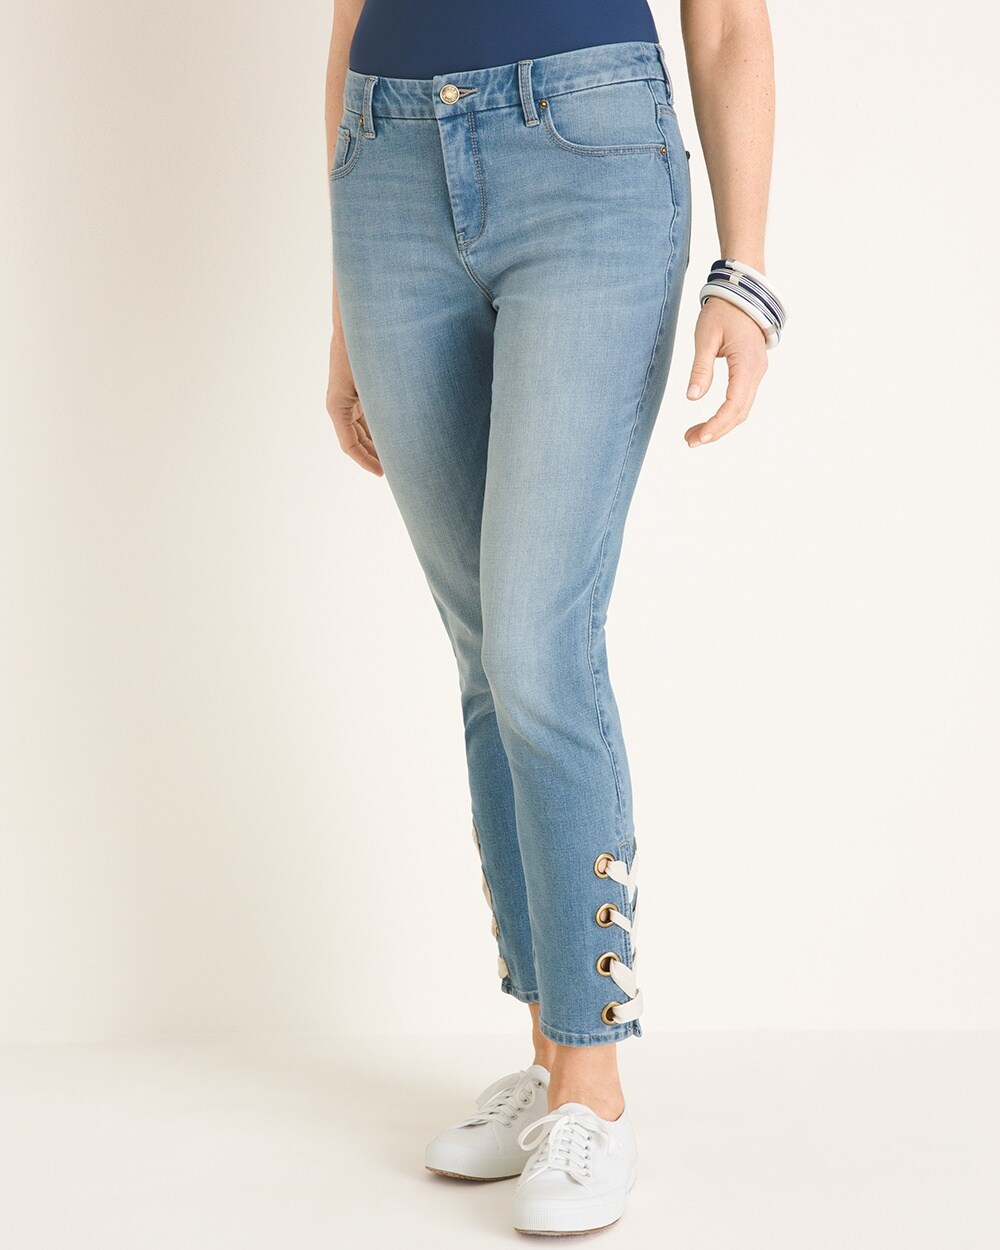 So Slimming Lace-Up Hem Girlfriend Ankle Jeans